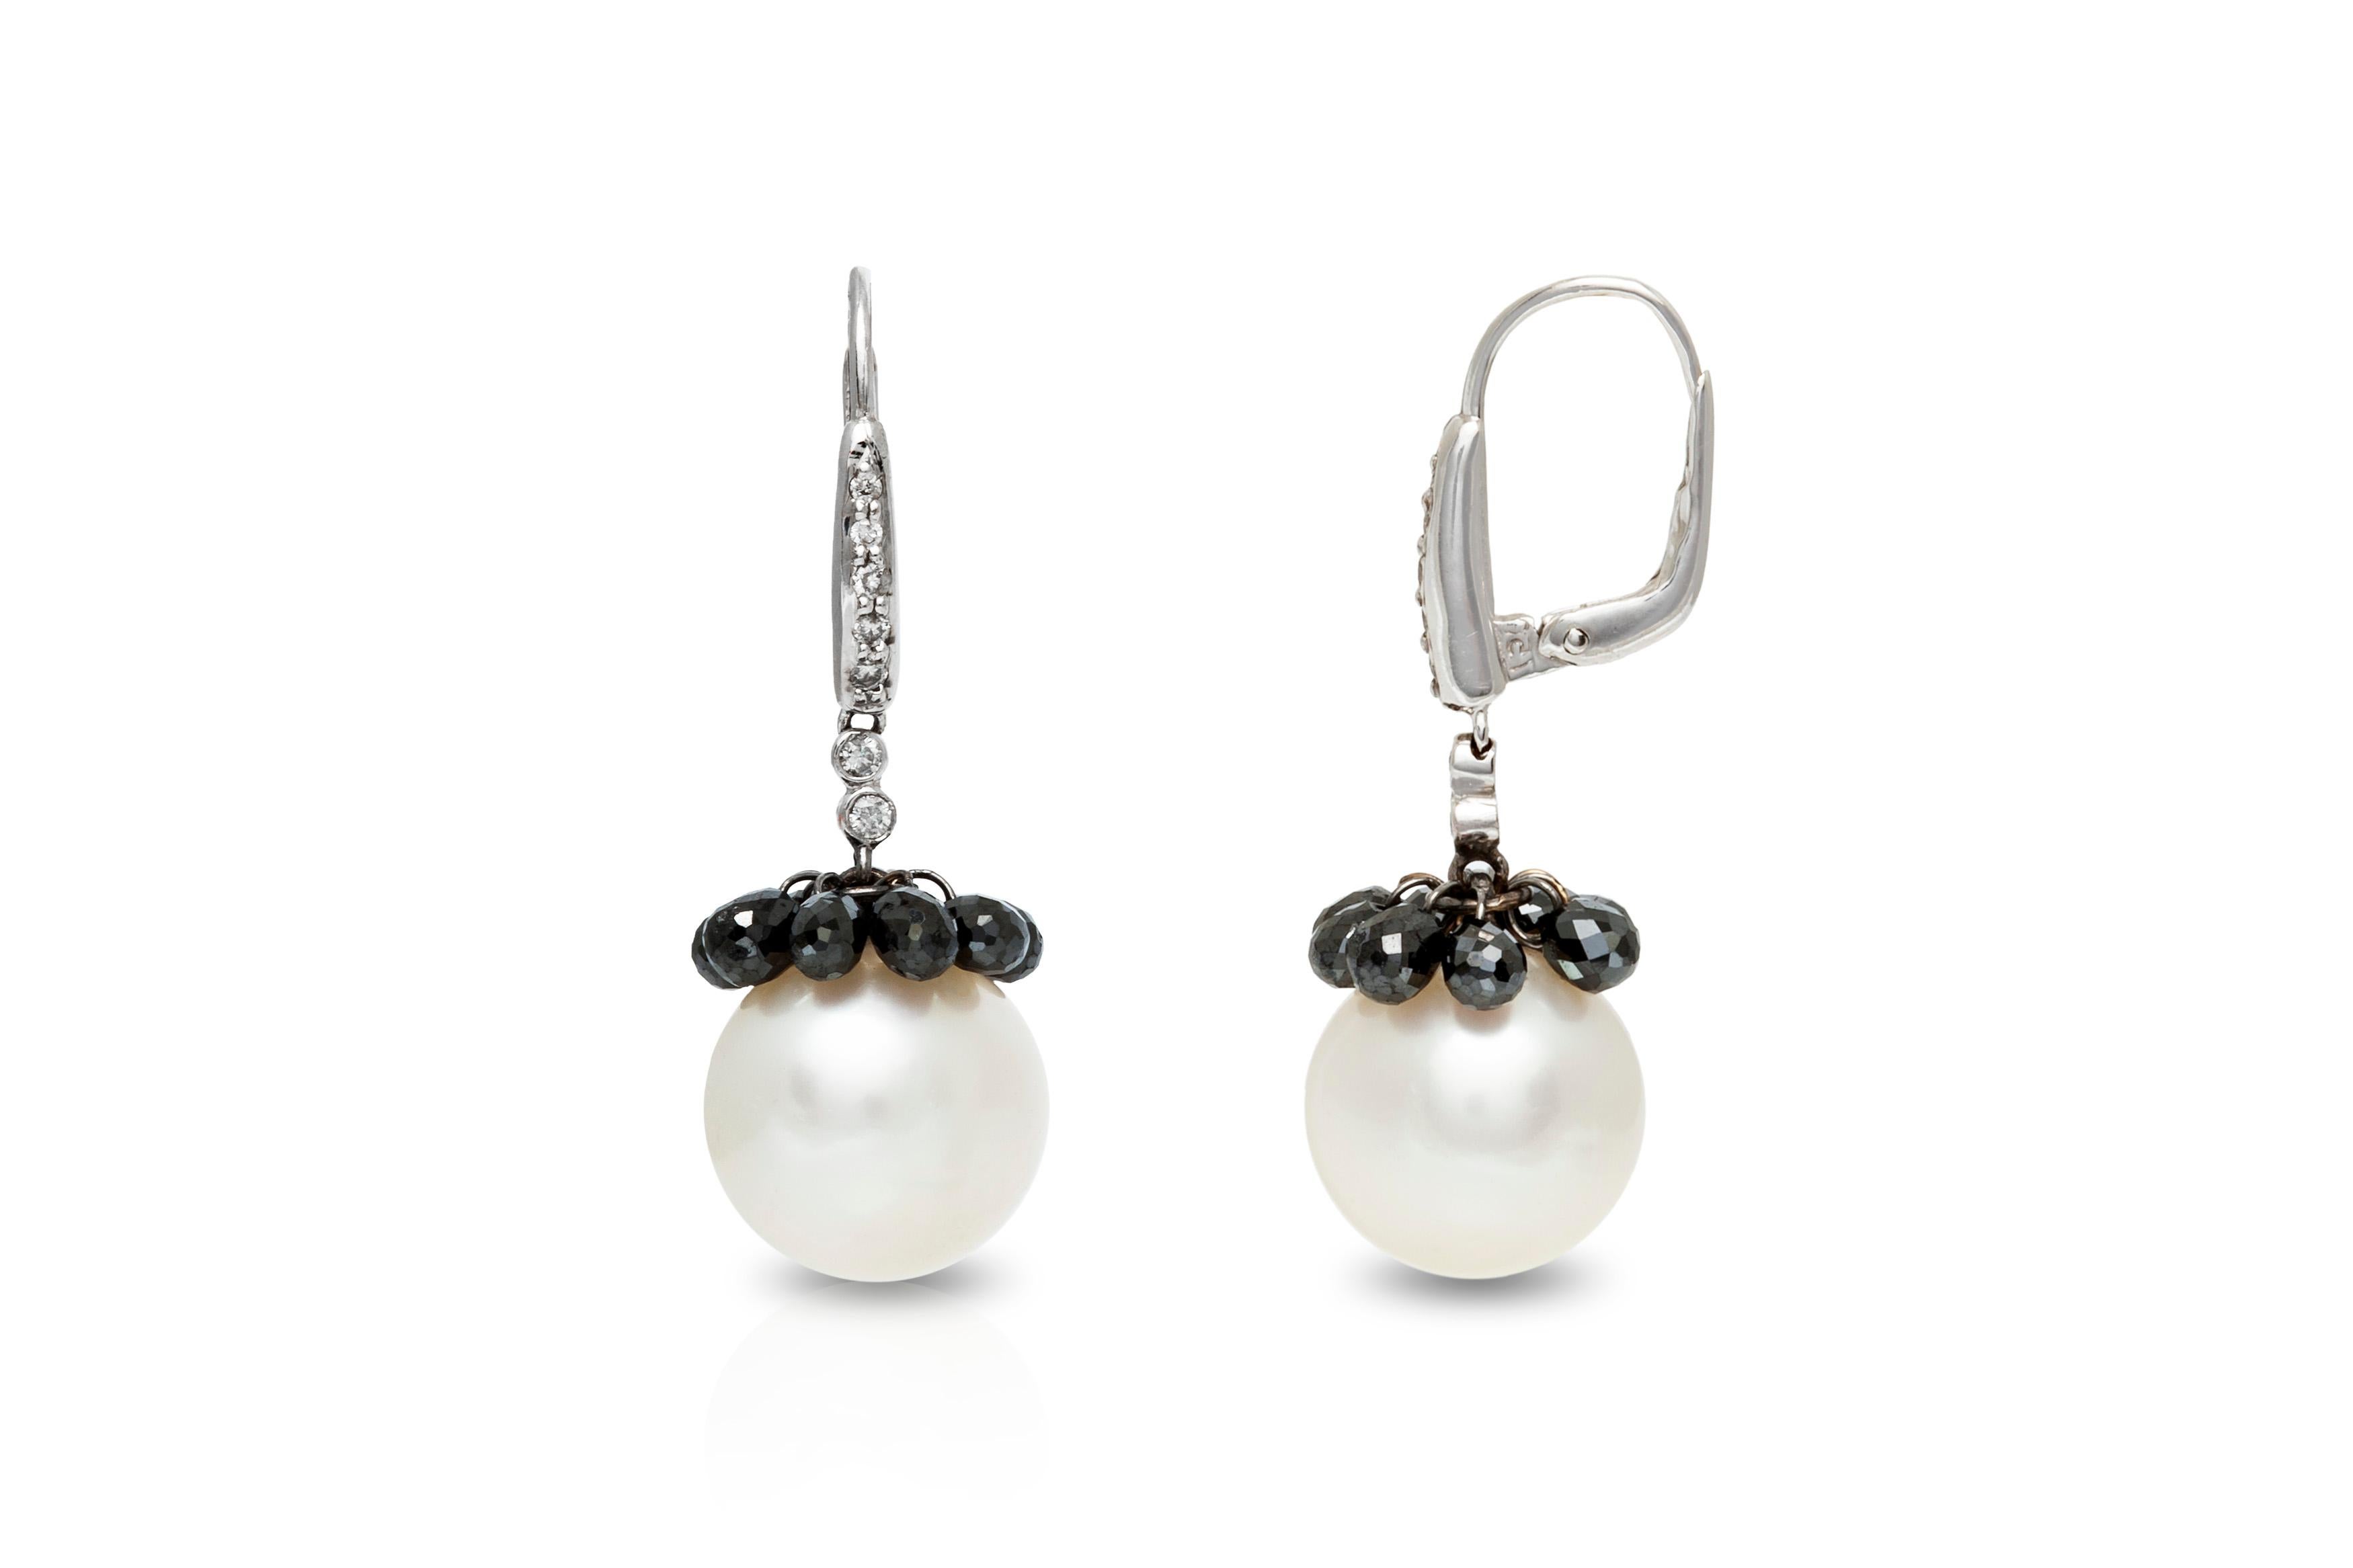 The earrings is finely crafted in 18k white gold with black diamonds weighing approximately total of 6.10 and diamonds weighing approximately total of 0.17 and southseapearl.
Very elegant earrings for day and night.
